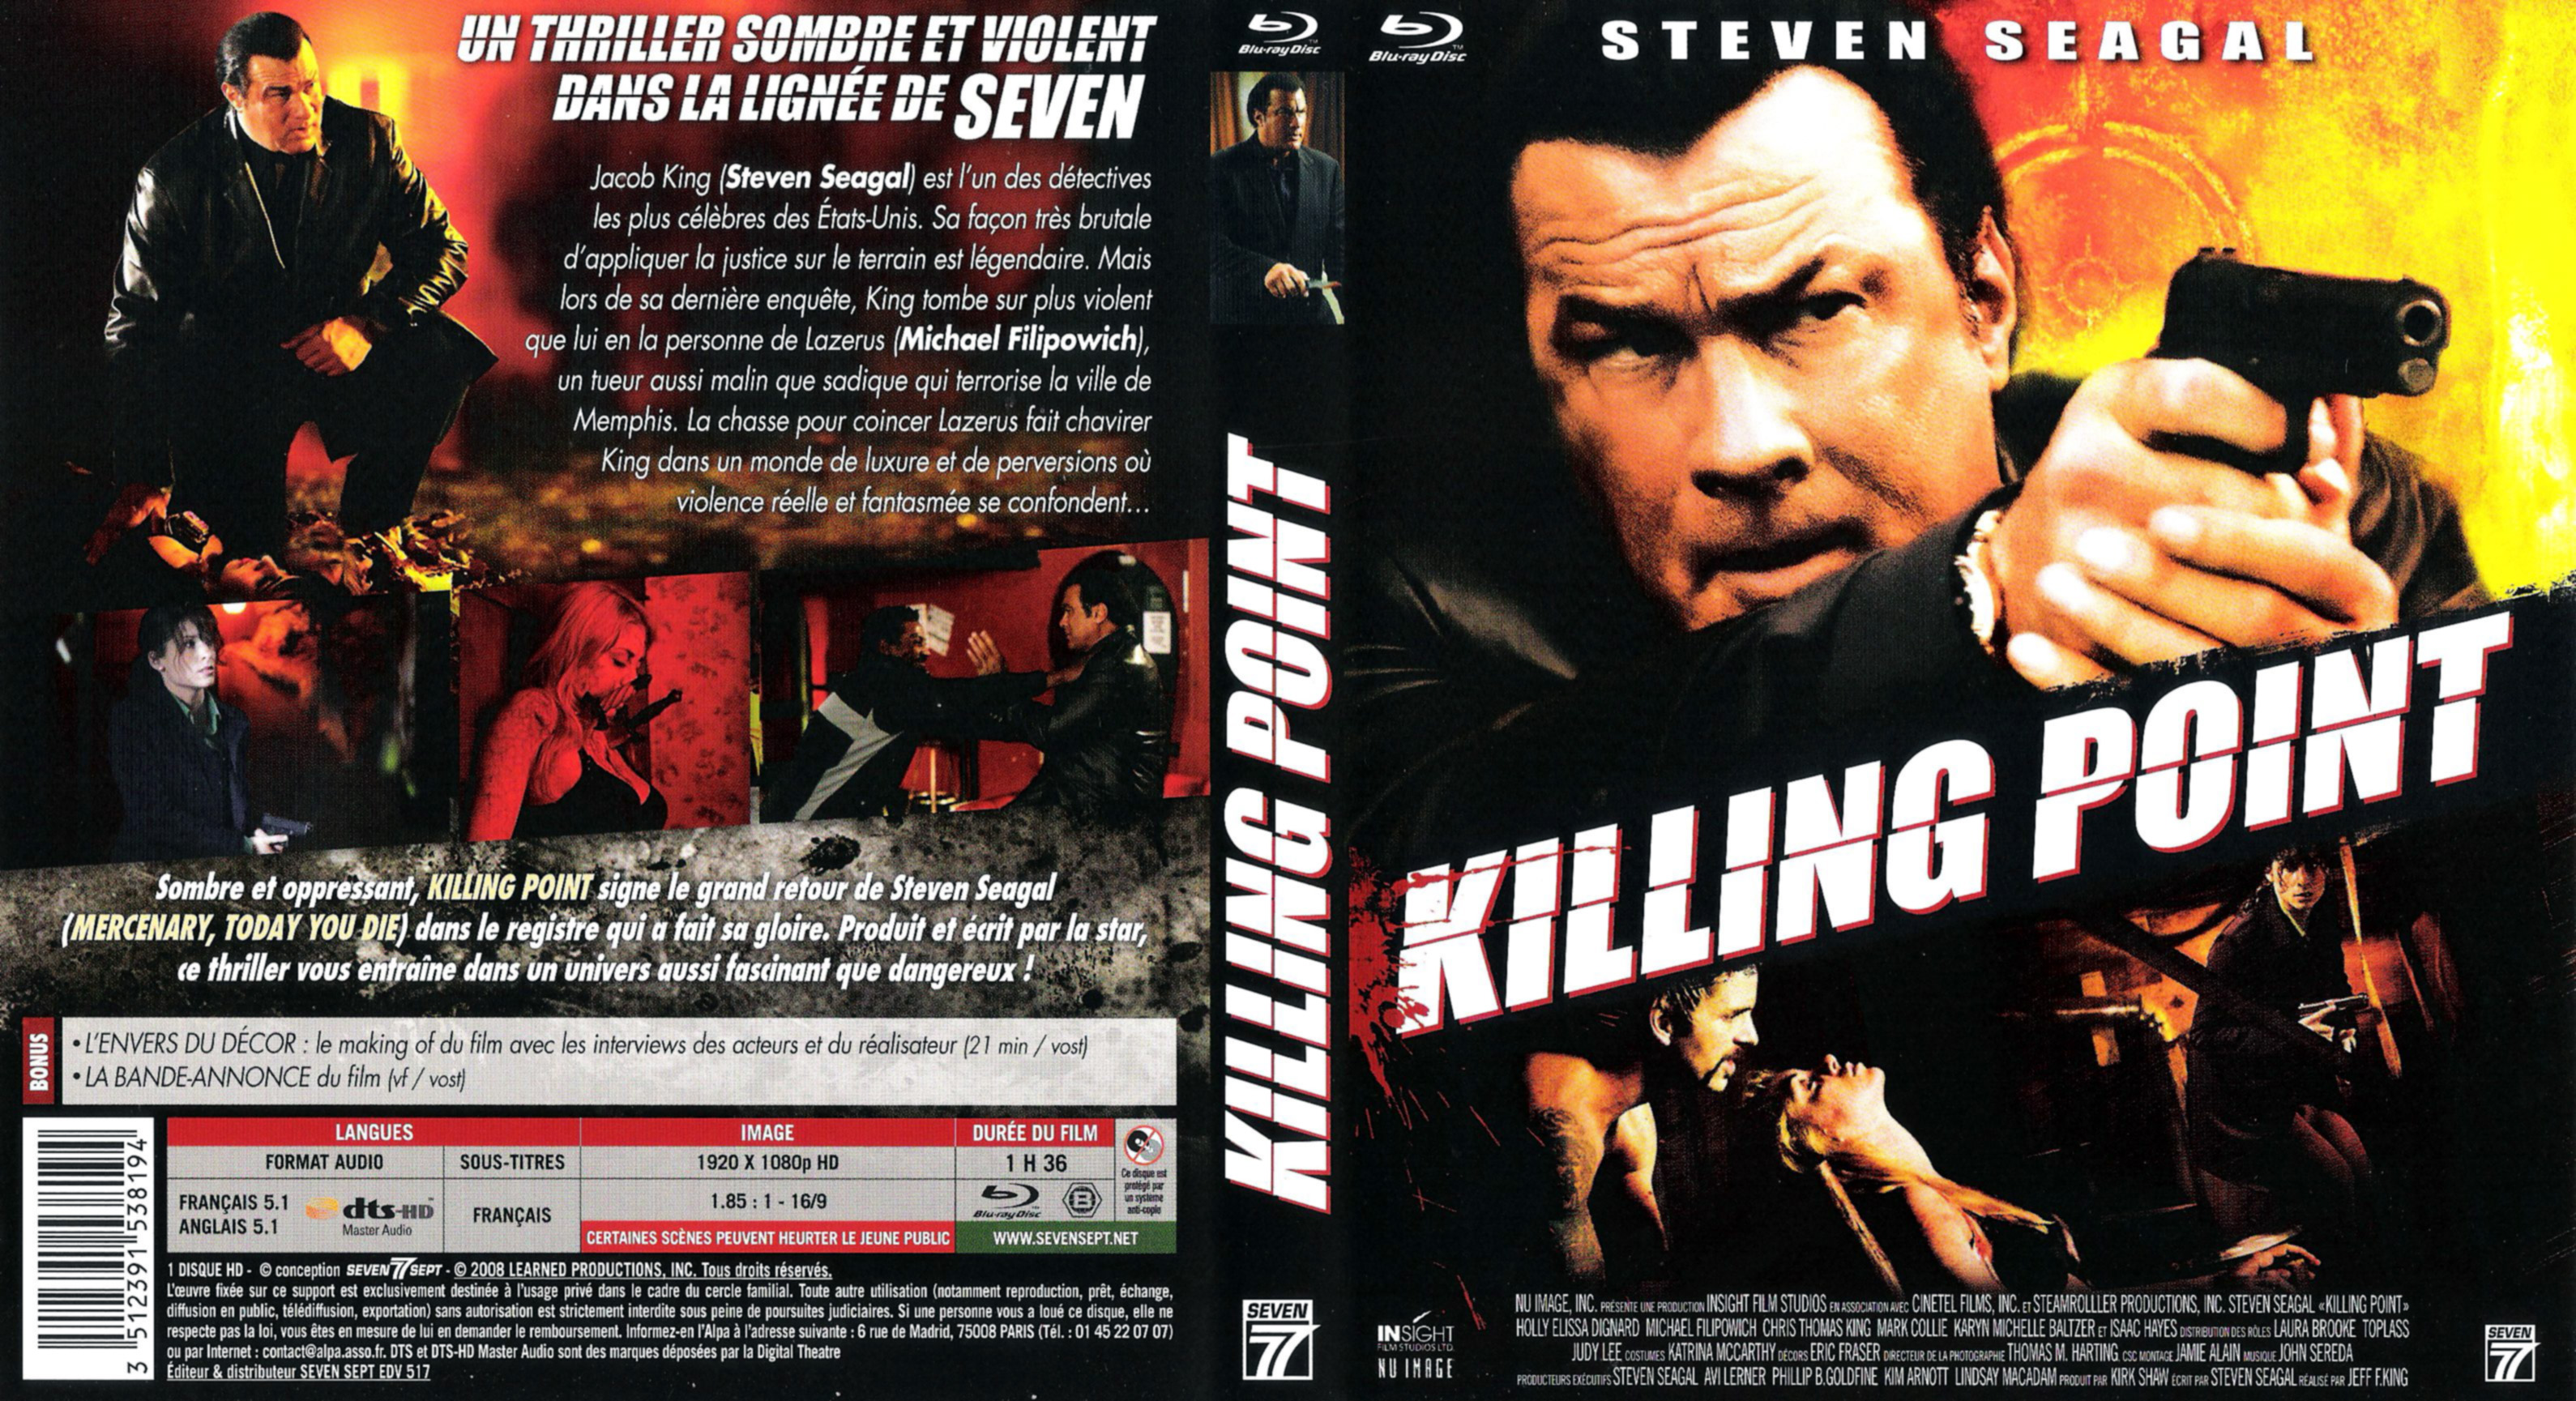 Jaquette DVD Killing point (BLU-RAY)